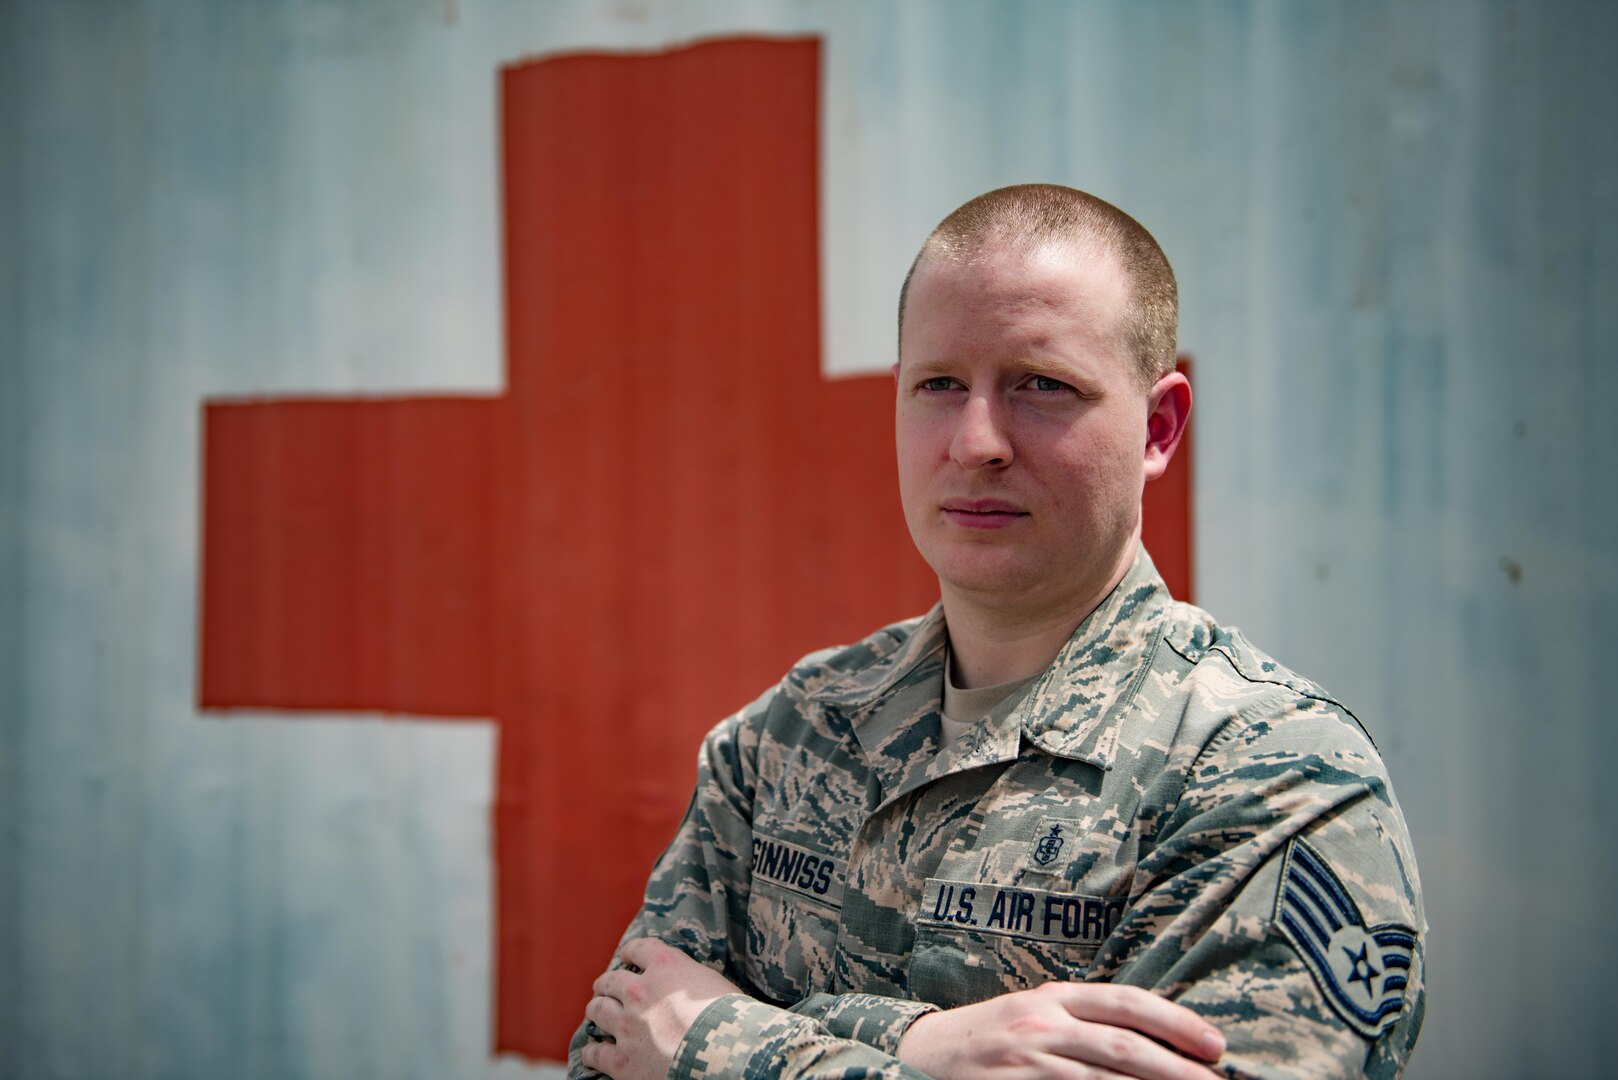 Staff Sgt. Ryan McGinniss, a biomedical equipment technician with the 332nd Expeditionary Medical Group, stands for a photo at the 407th Air Expeditionary Group May 9, 2017, in Southwest Asia. McGinnis is the only technician maintaining critical deployed medical equipment supporting joint and  coalition members on base. (U.S. Air Force photo by Staff Sgt. Alexander W. Riedel)